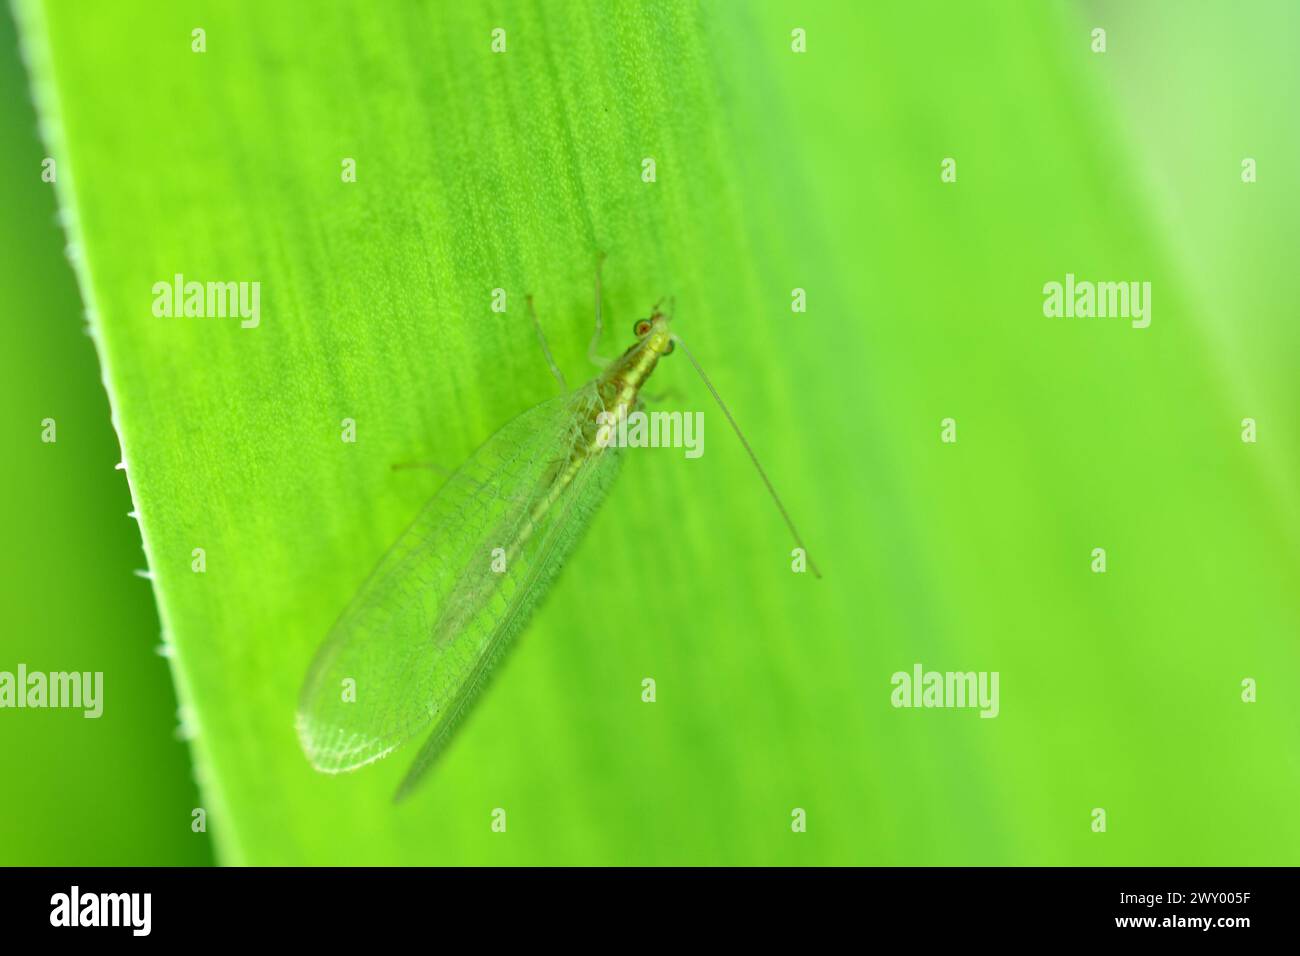 A lacewing, an insect with transparent wings, sits on a green leaf. Stock Photo